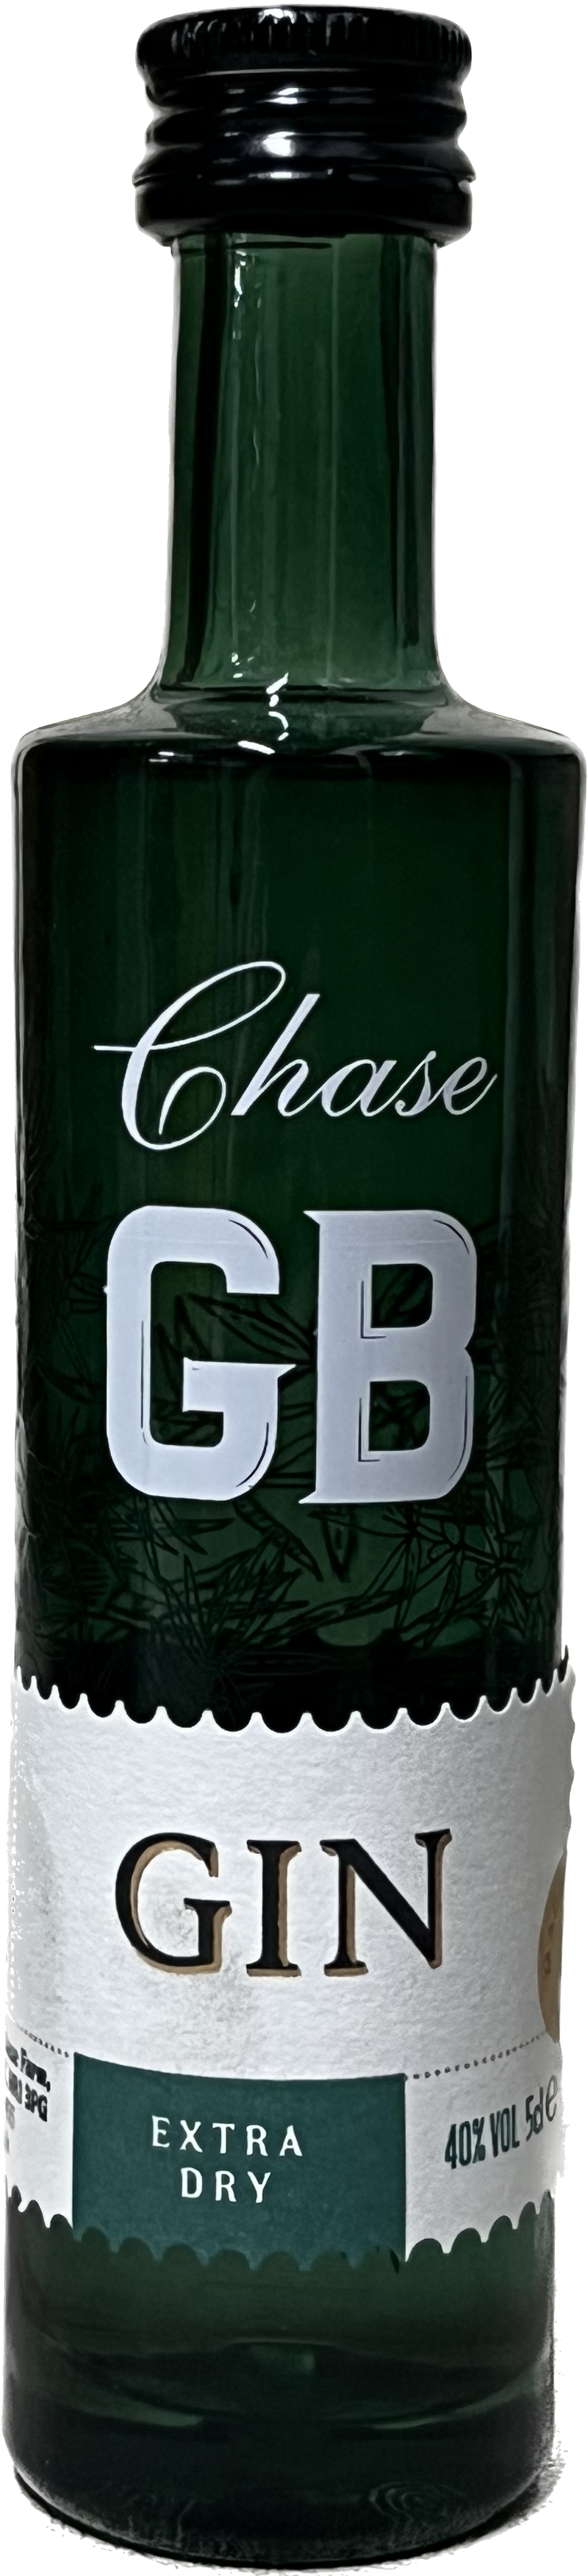 Chase GB Extra Dry Gin Miniature 5cl